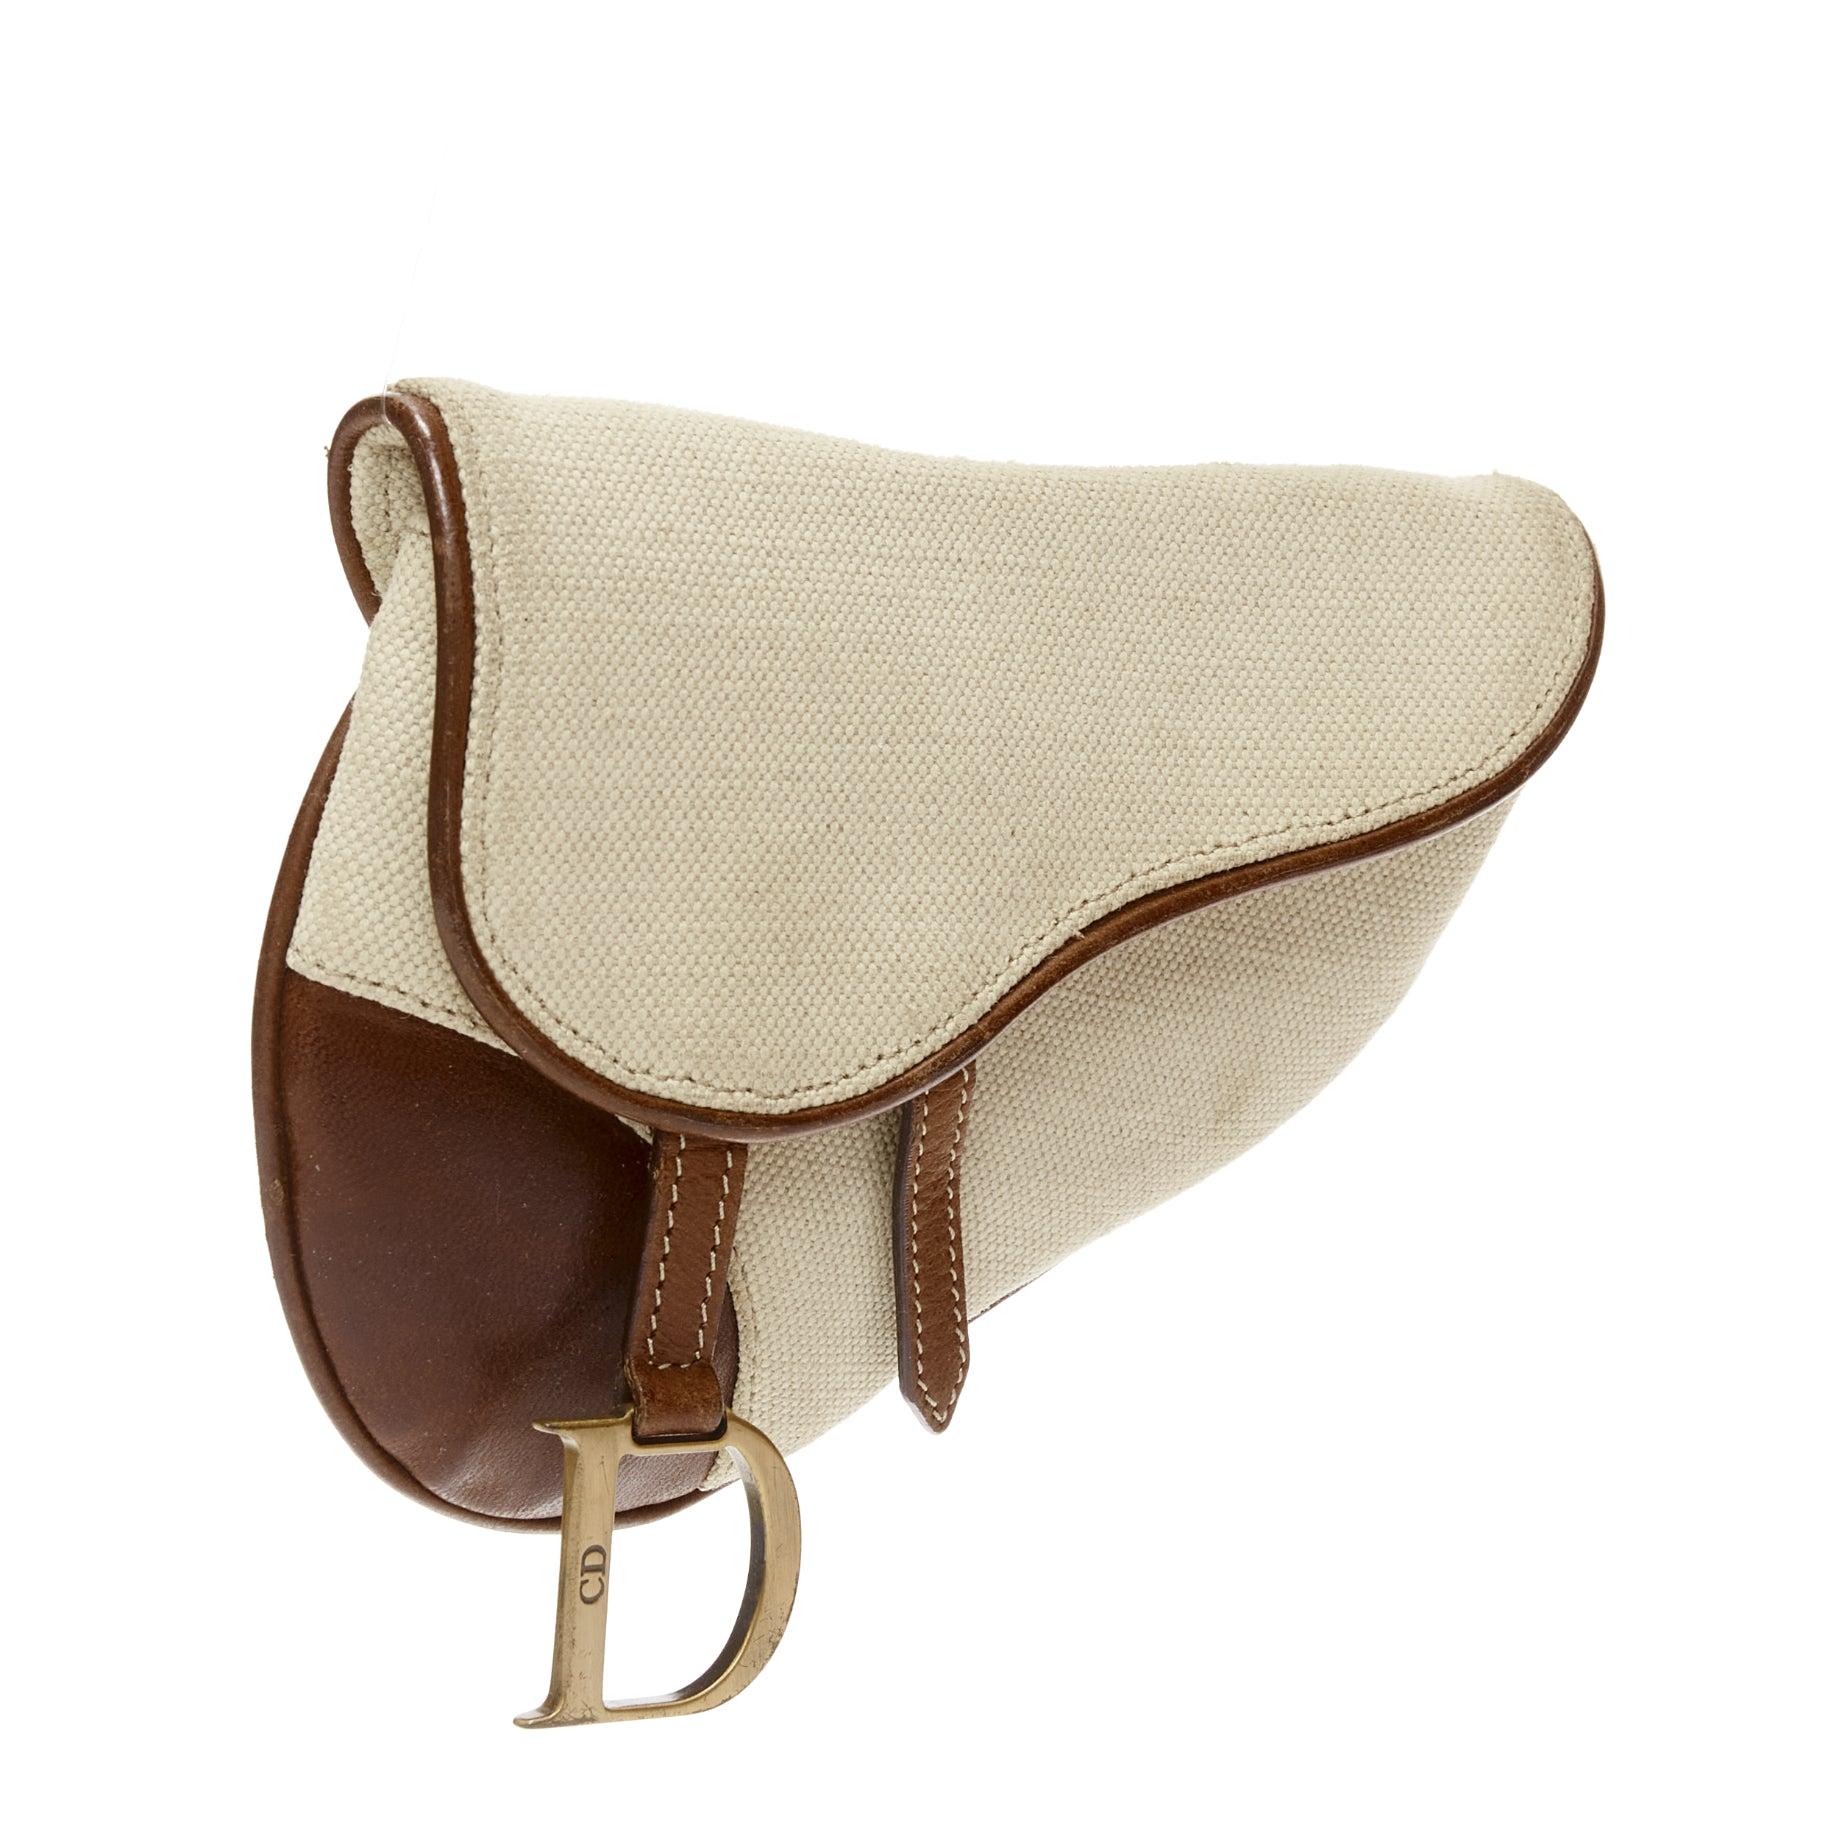 CHRISTIAN DIOR John Galliano Vintage Saddle D beige canvas leather belt bag pouch
Reference: TGAS/D00357
Brand: Dior
Designer: John Galliano
Model: Saddle
Material: Canvas, Leather
Color: Khaki, Brown
Pattern: Solid
Closure: Snap Buttons
Lining: